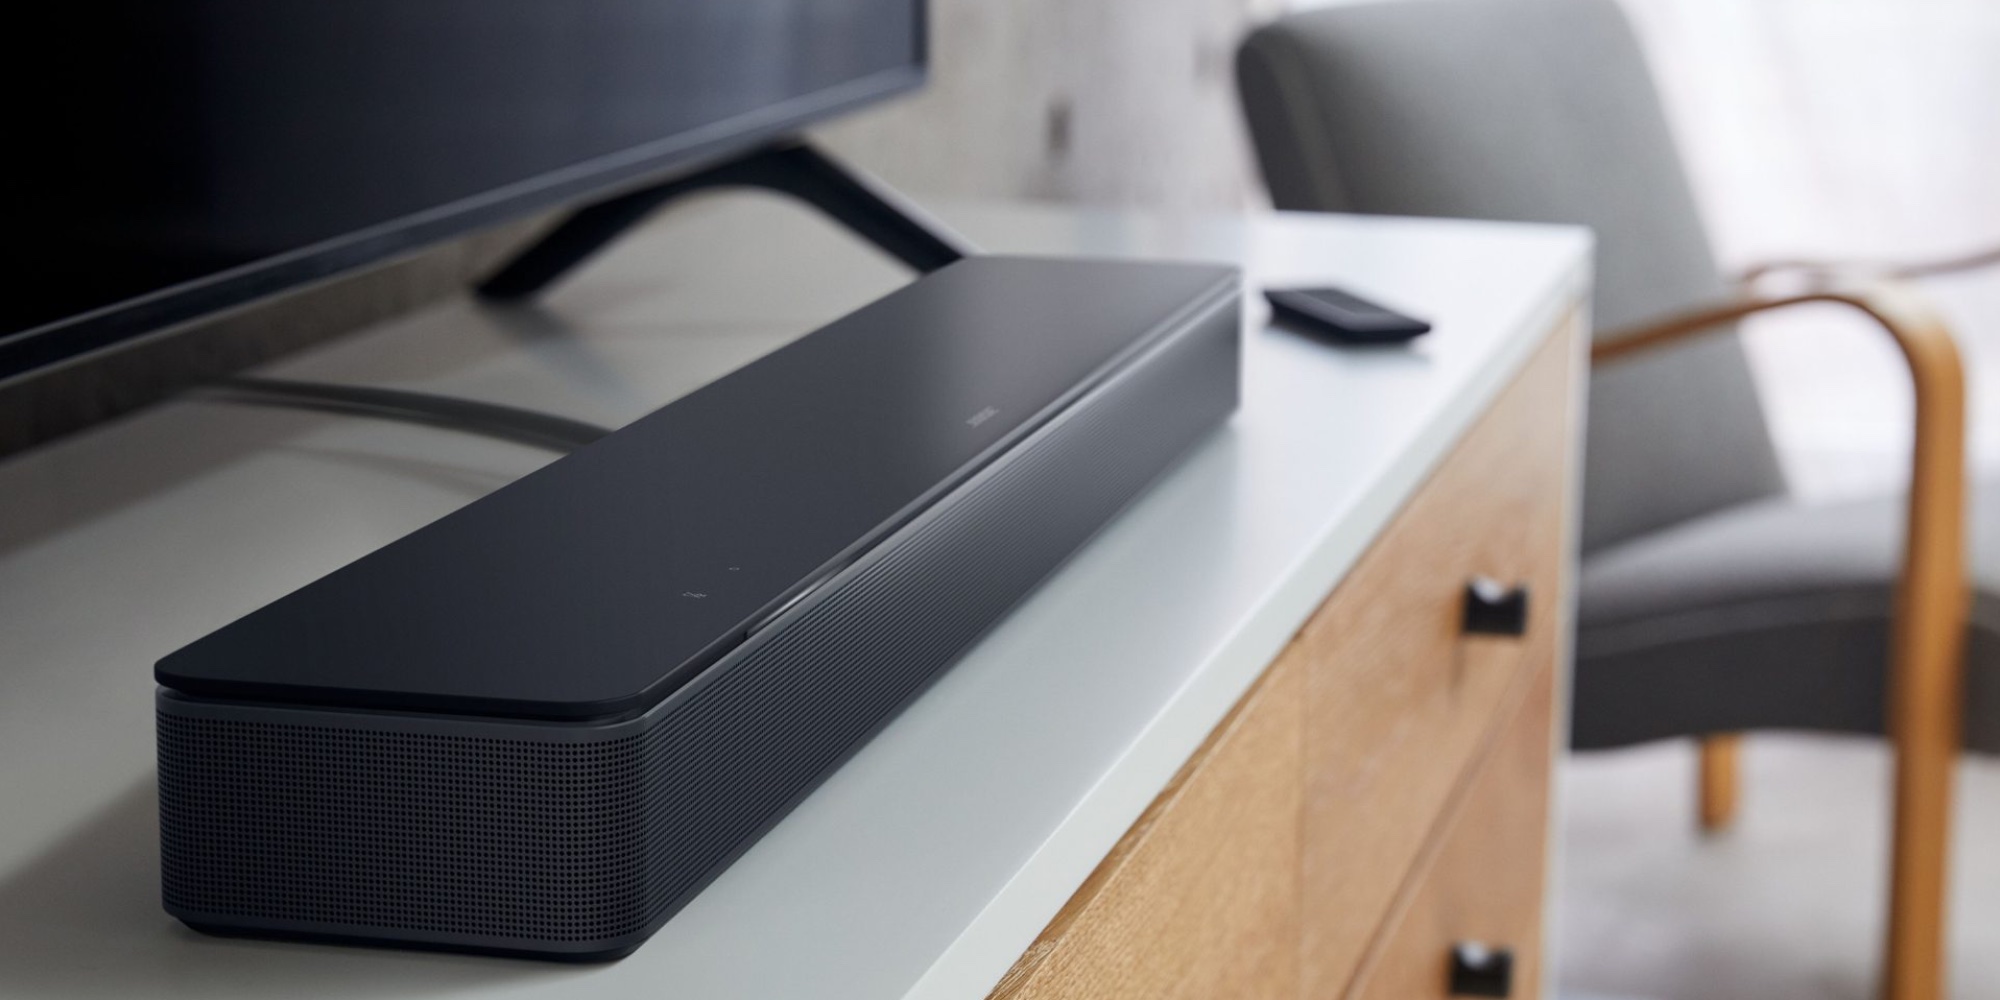 Bose Soundbar 300 debuts with AirPlay 2, voice control, more